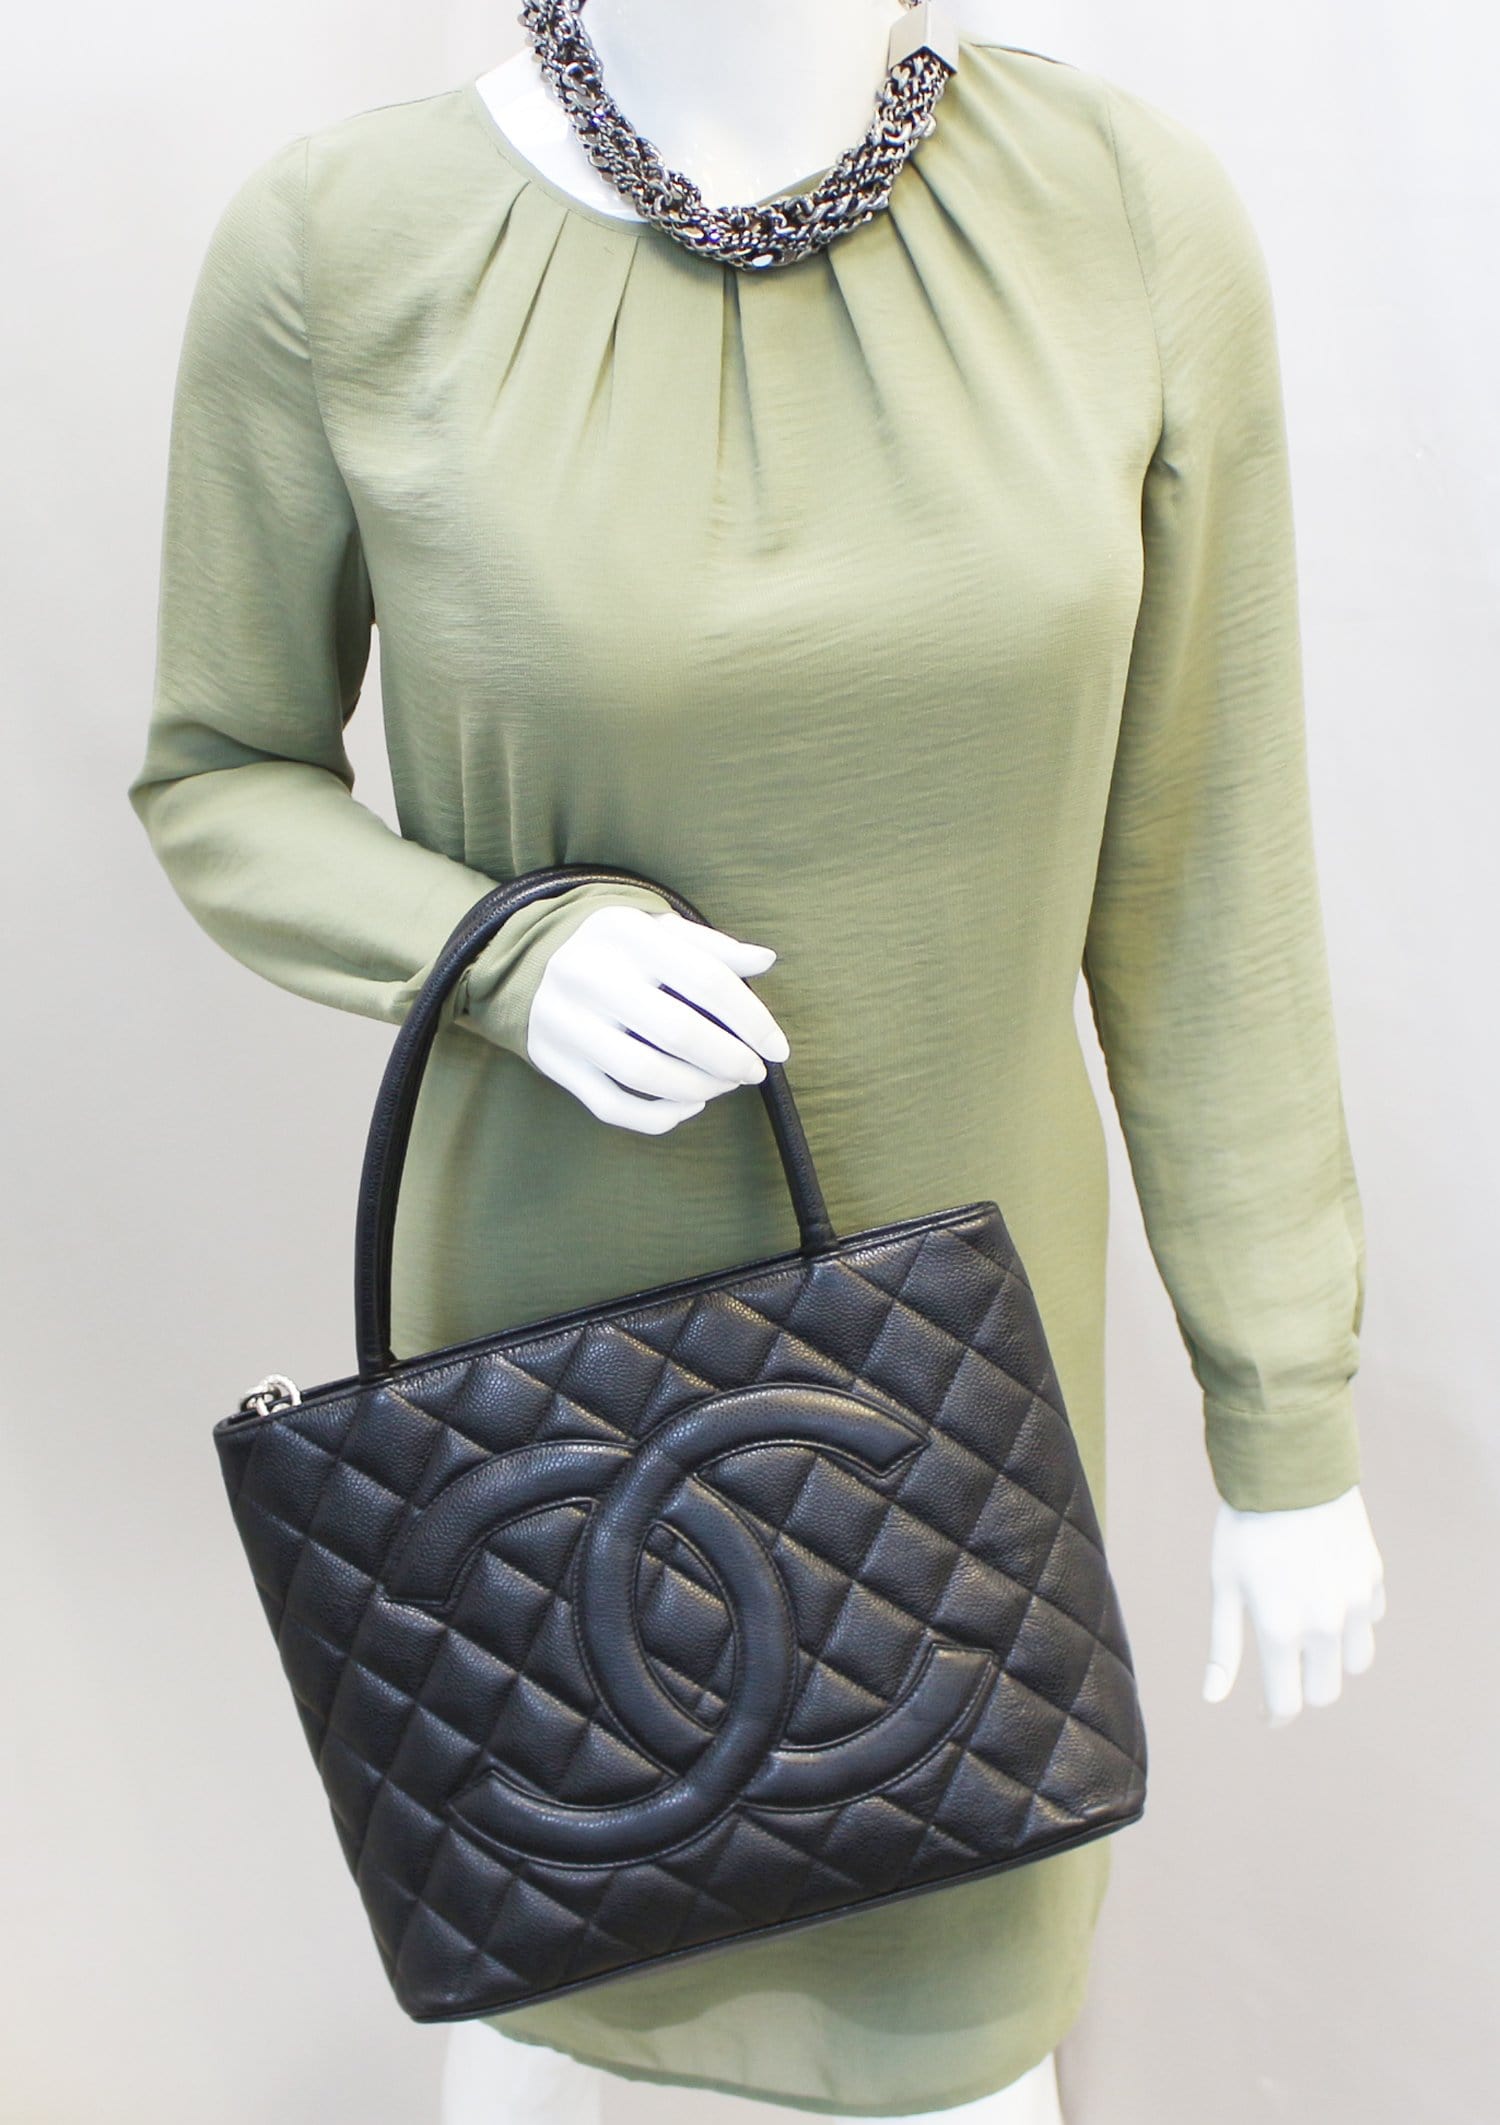 Sold at Auction: Chanel Black Quilted Caviar Leather Medallion Tote